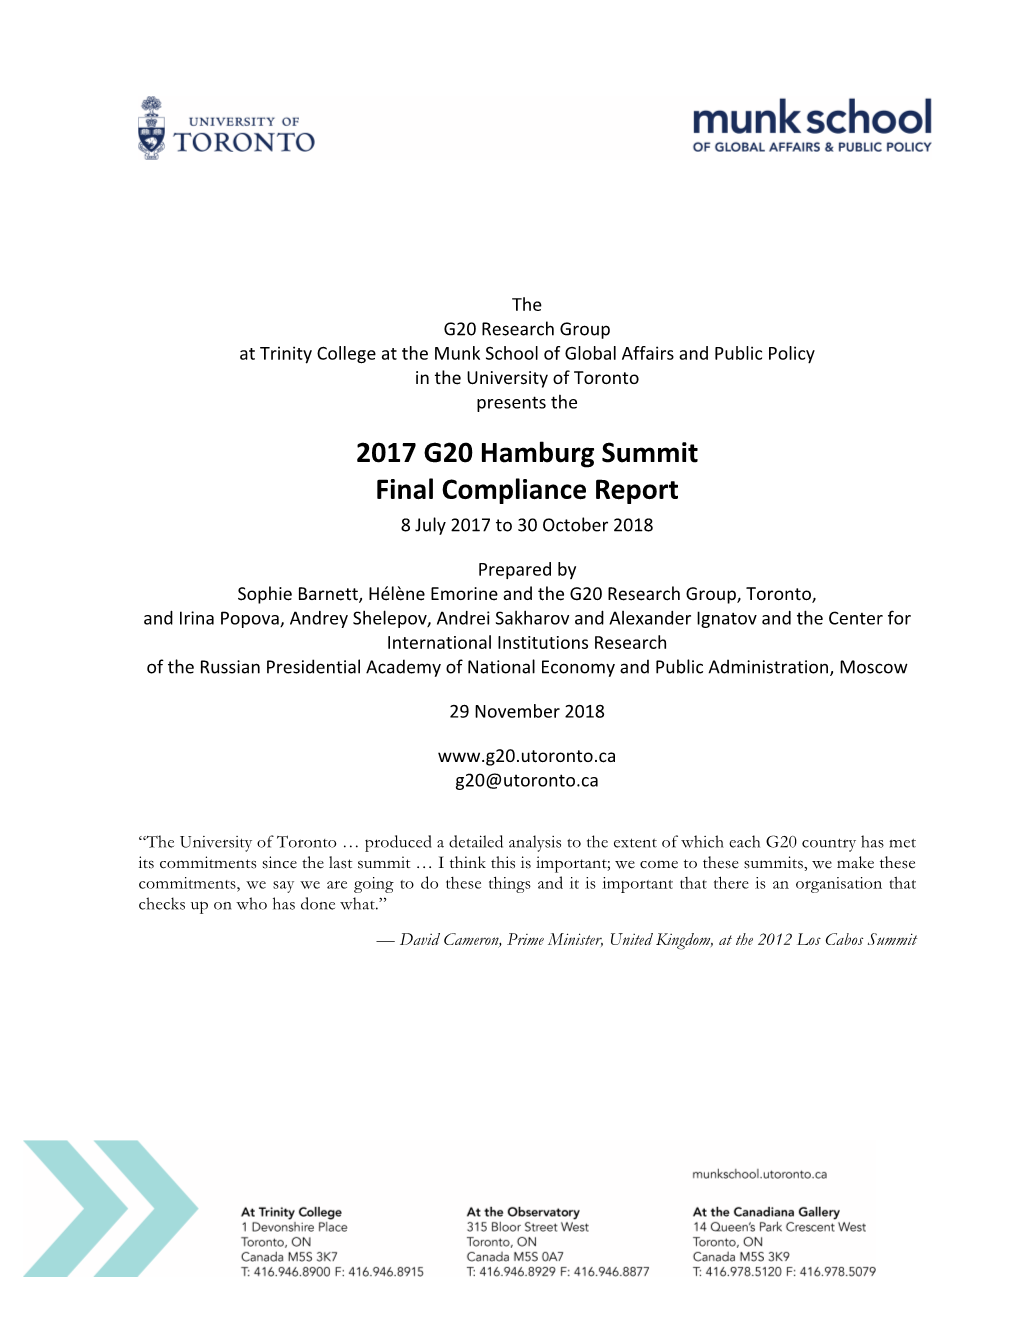 2017 G20 Hamburg Summit Final Compliance Report 8 July 2017 to 30 October 2018